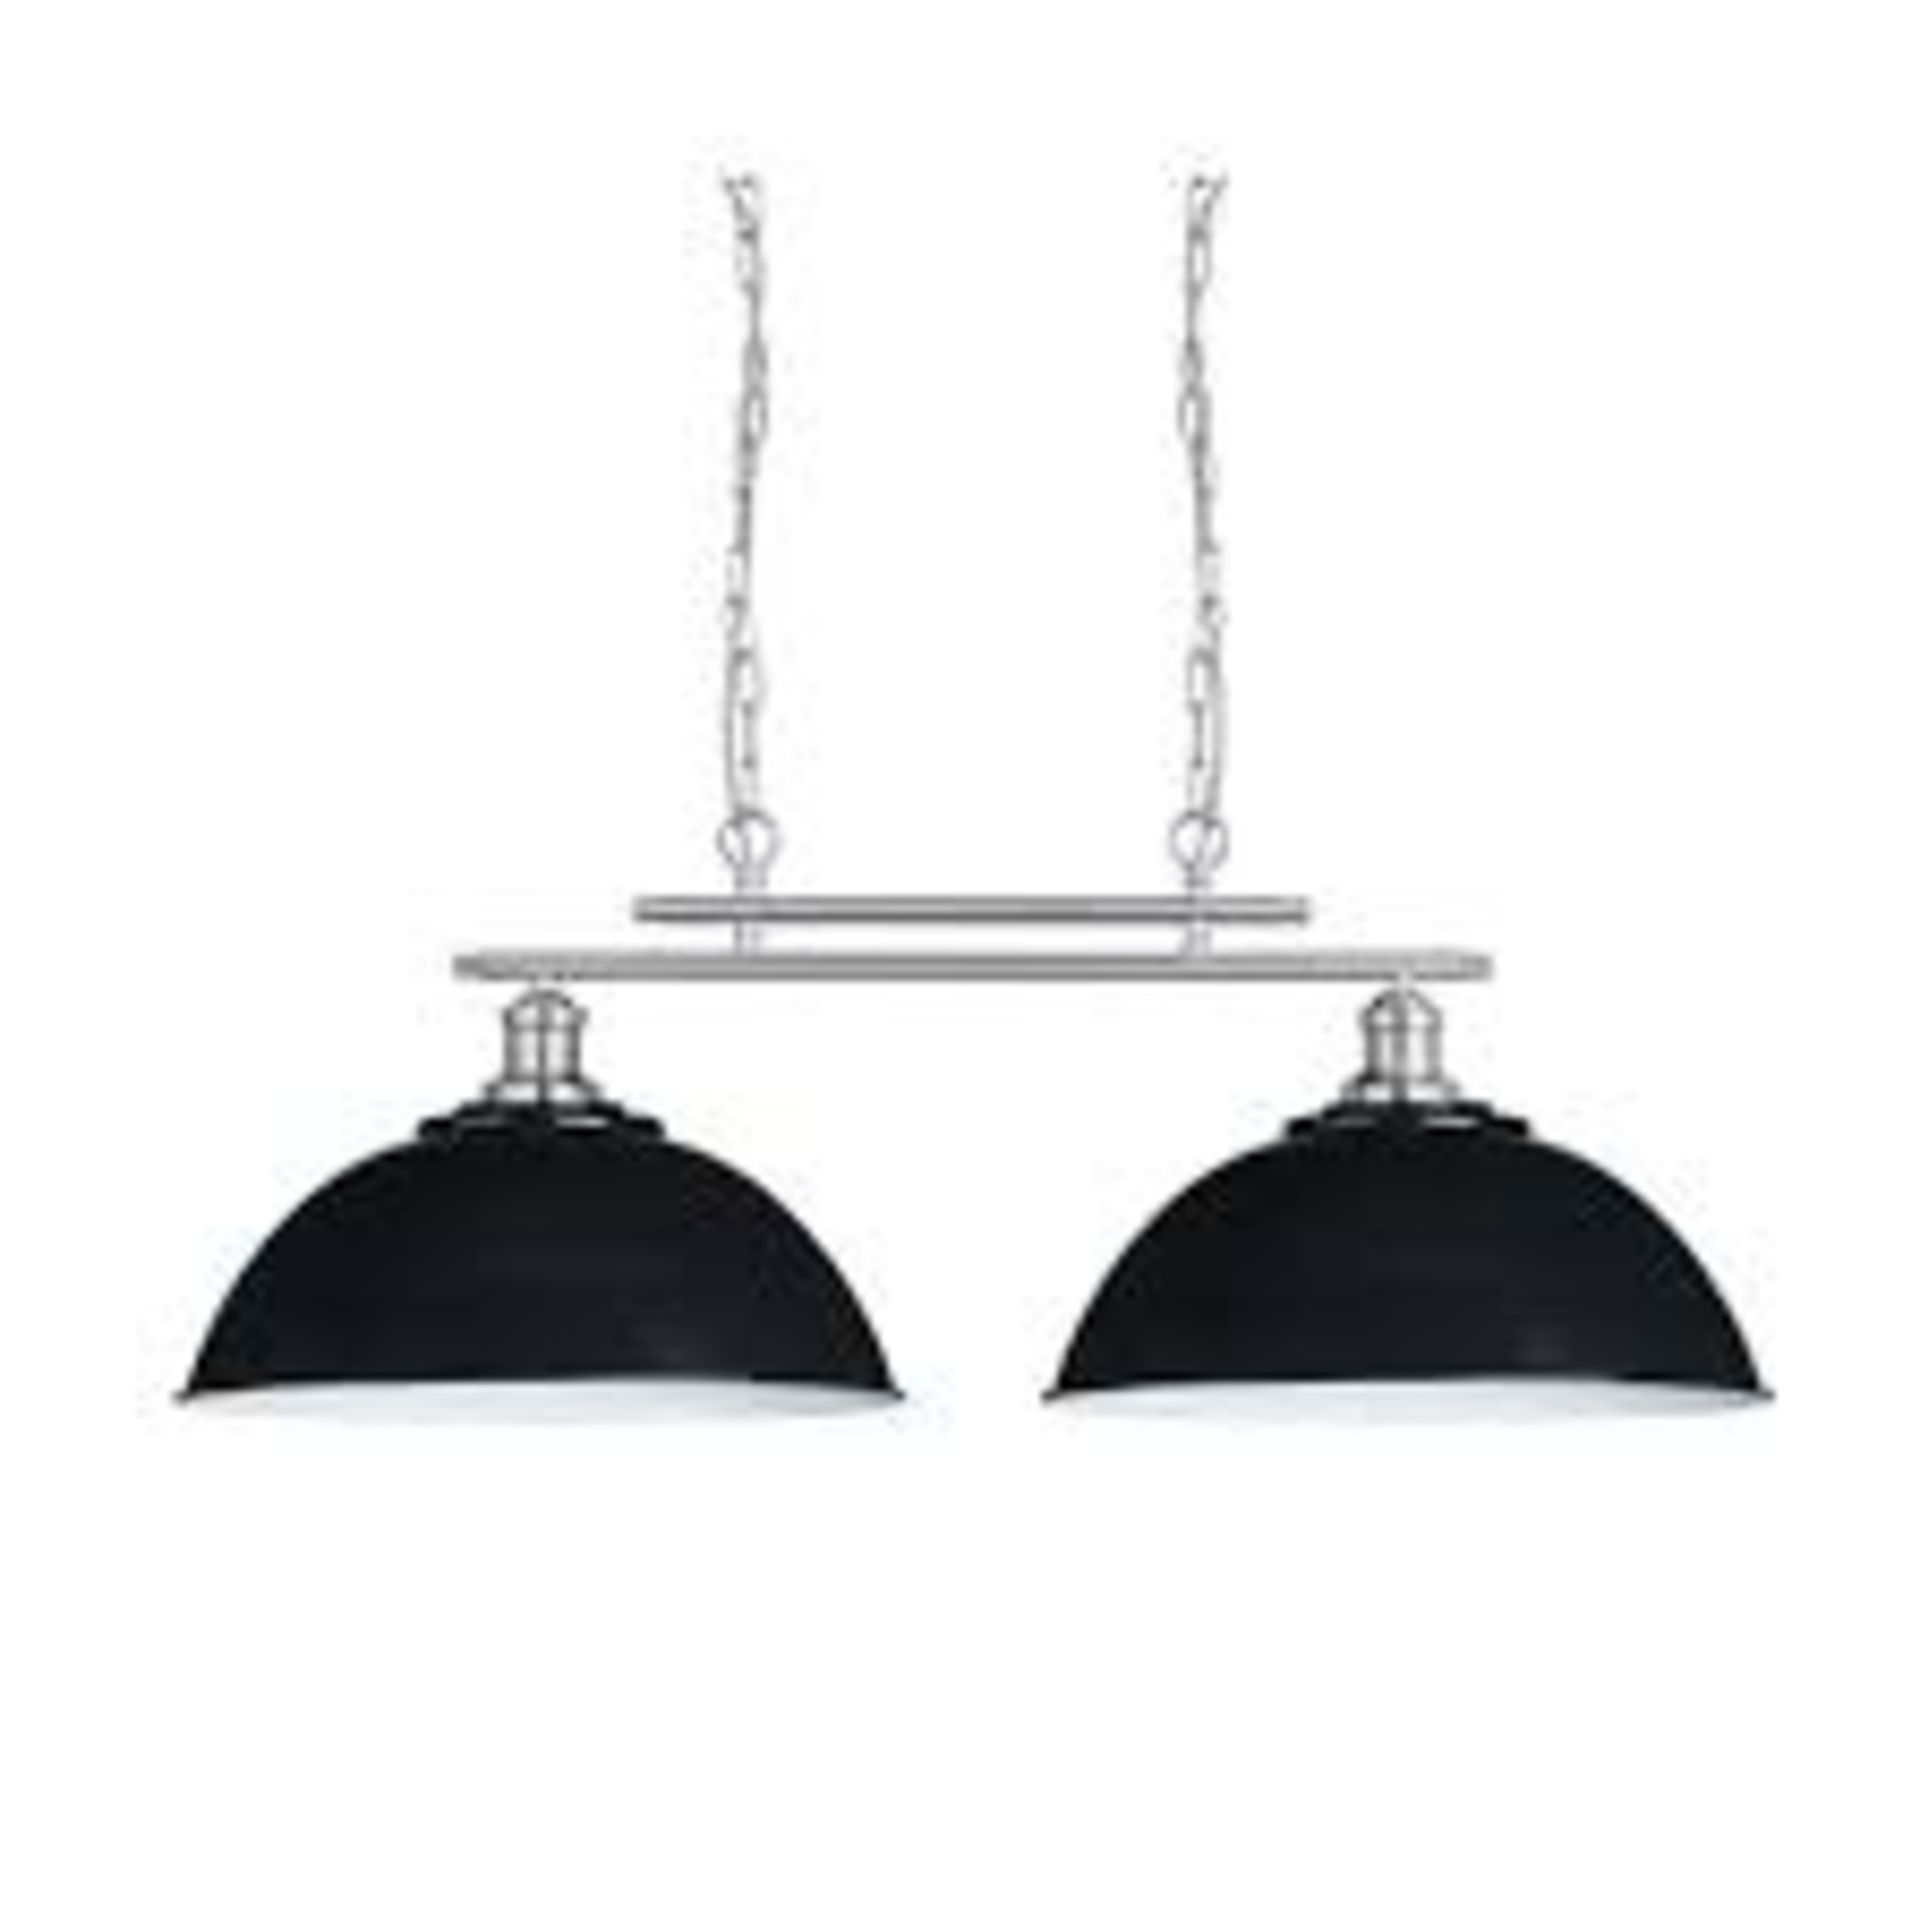 1 x Searchlight Fusion Ceiling Bar in satin silver - Ref: 0932-2BK - new and Boxed - RRP: £130.00 - Image 4 of 4